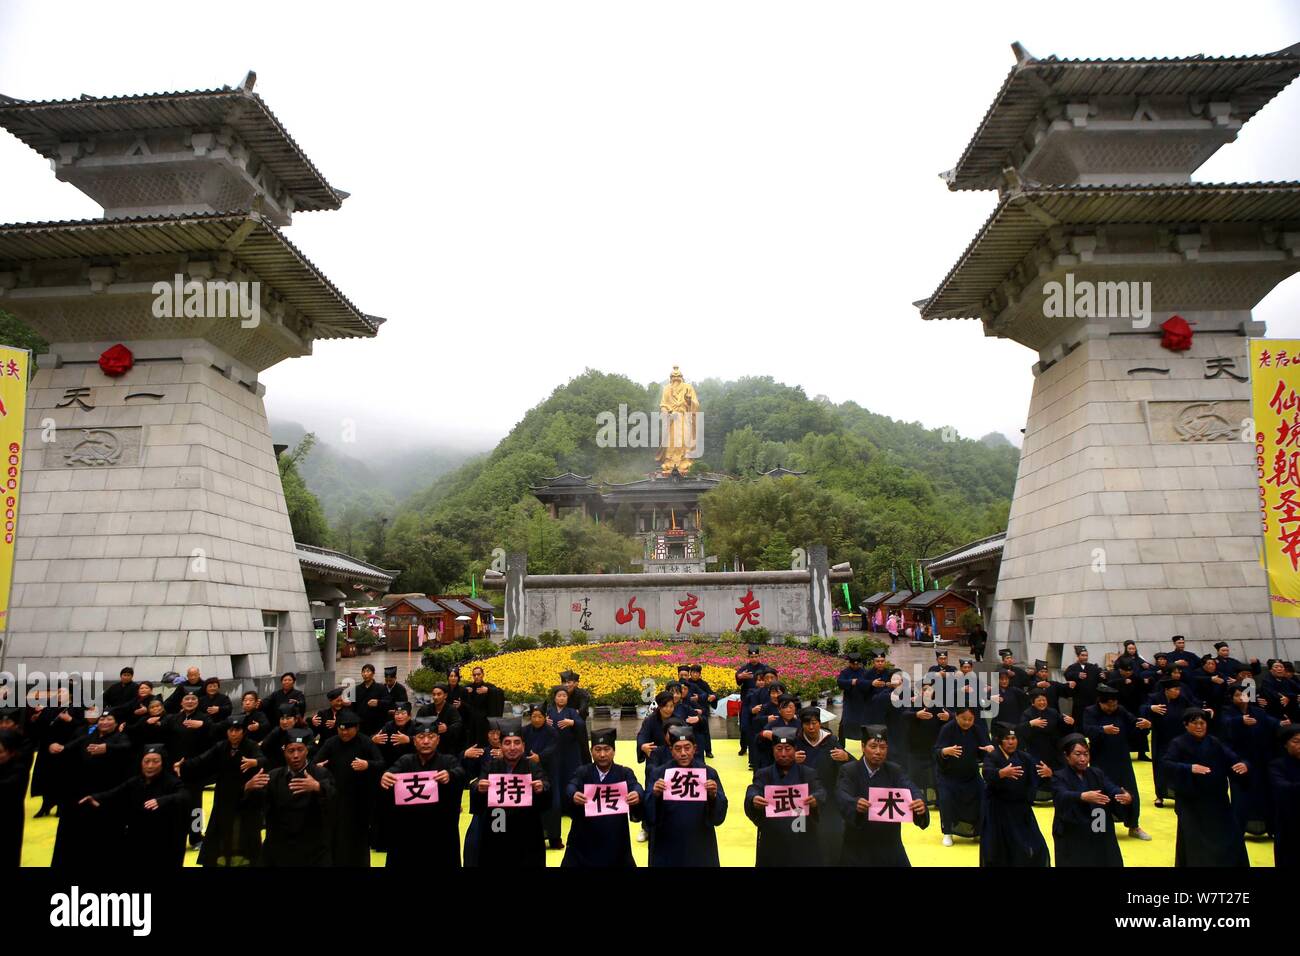 Taoists, in the shape of Chinese characters "Zhi Chi Tai Ji" (meaning in  favor of tai chi in English), are seen at the Laojun Mountain in Luoyang  city Stock Photo - Alamy